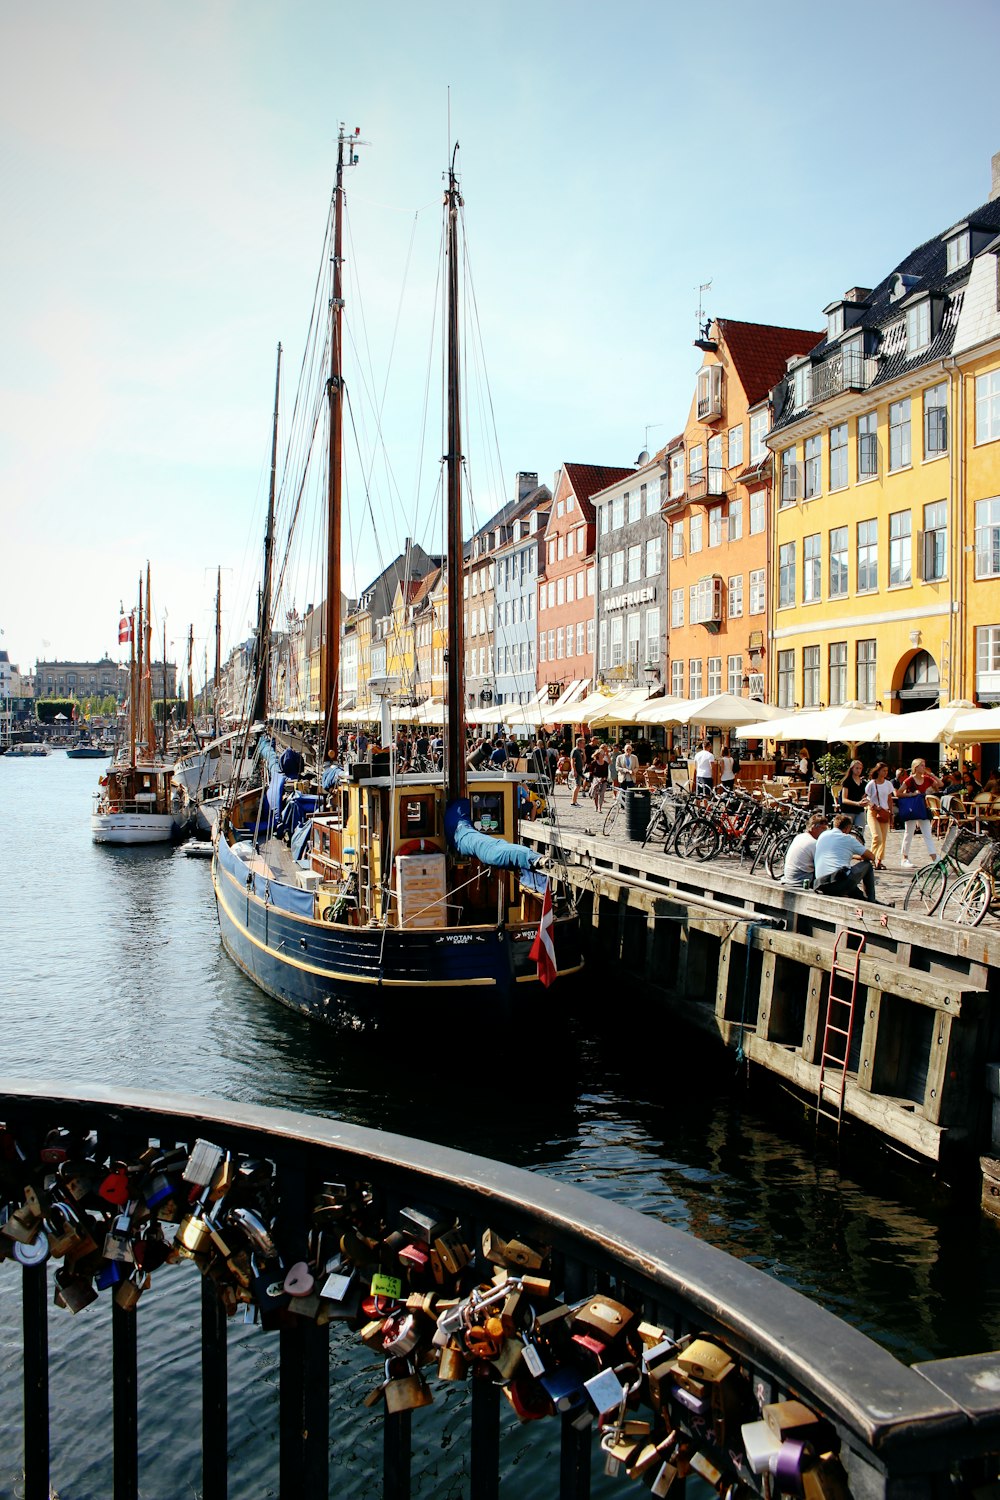 people near Nyhavn in Copenhagen buildings viewing boats on body of water under blue and white sky during daytime